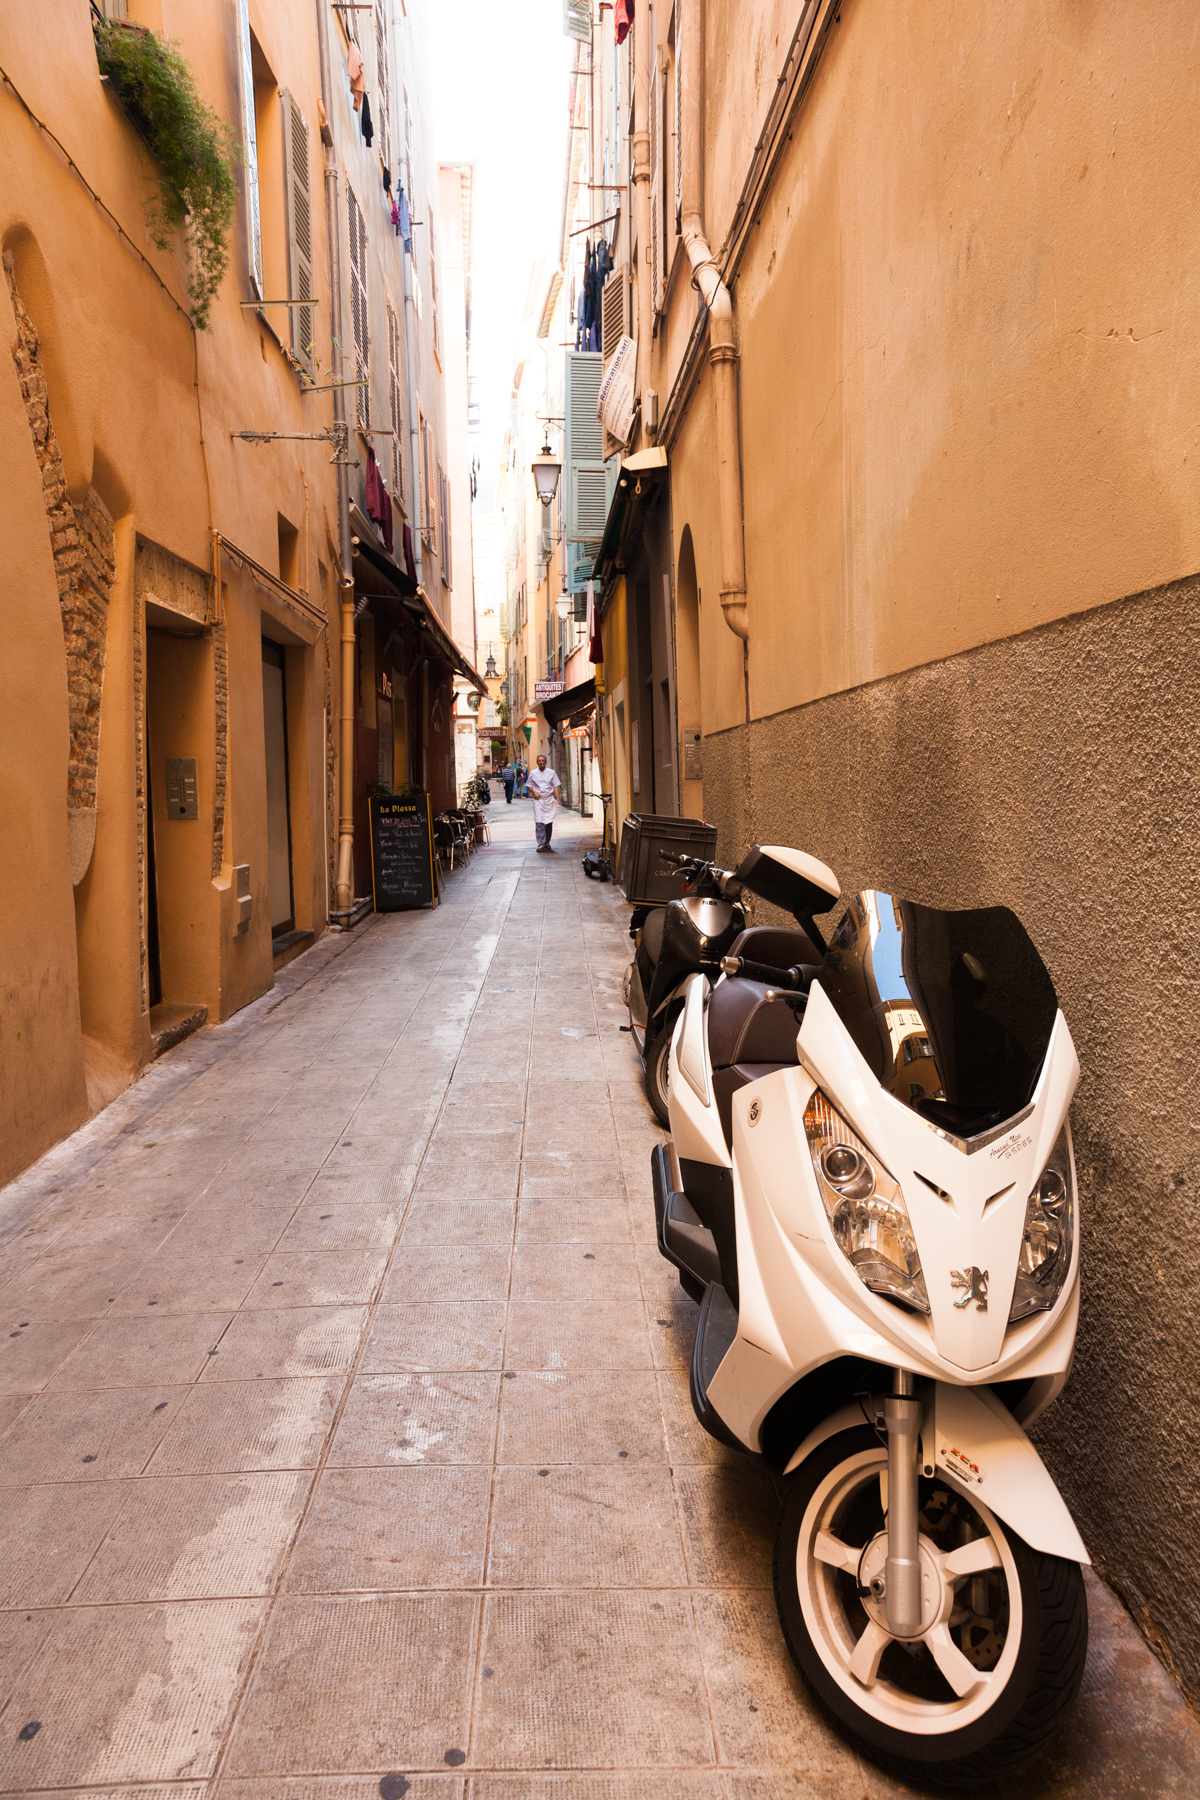 Street scene in Nice with scooter (peugeot naturally)